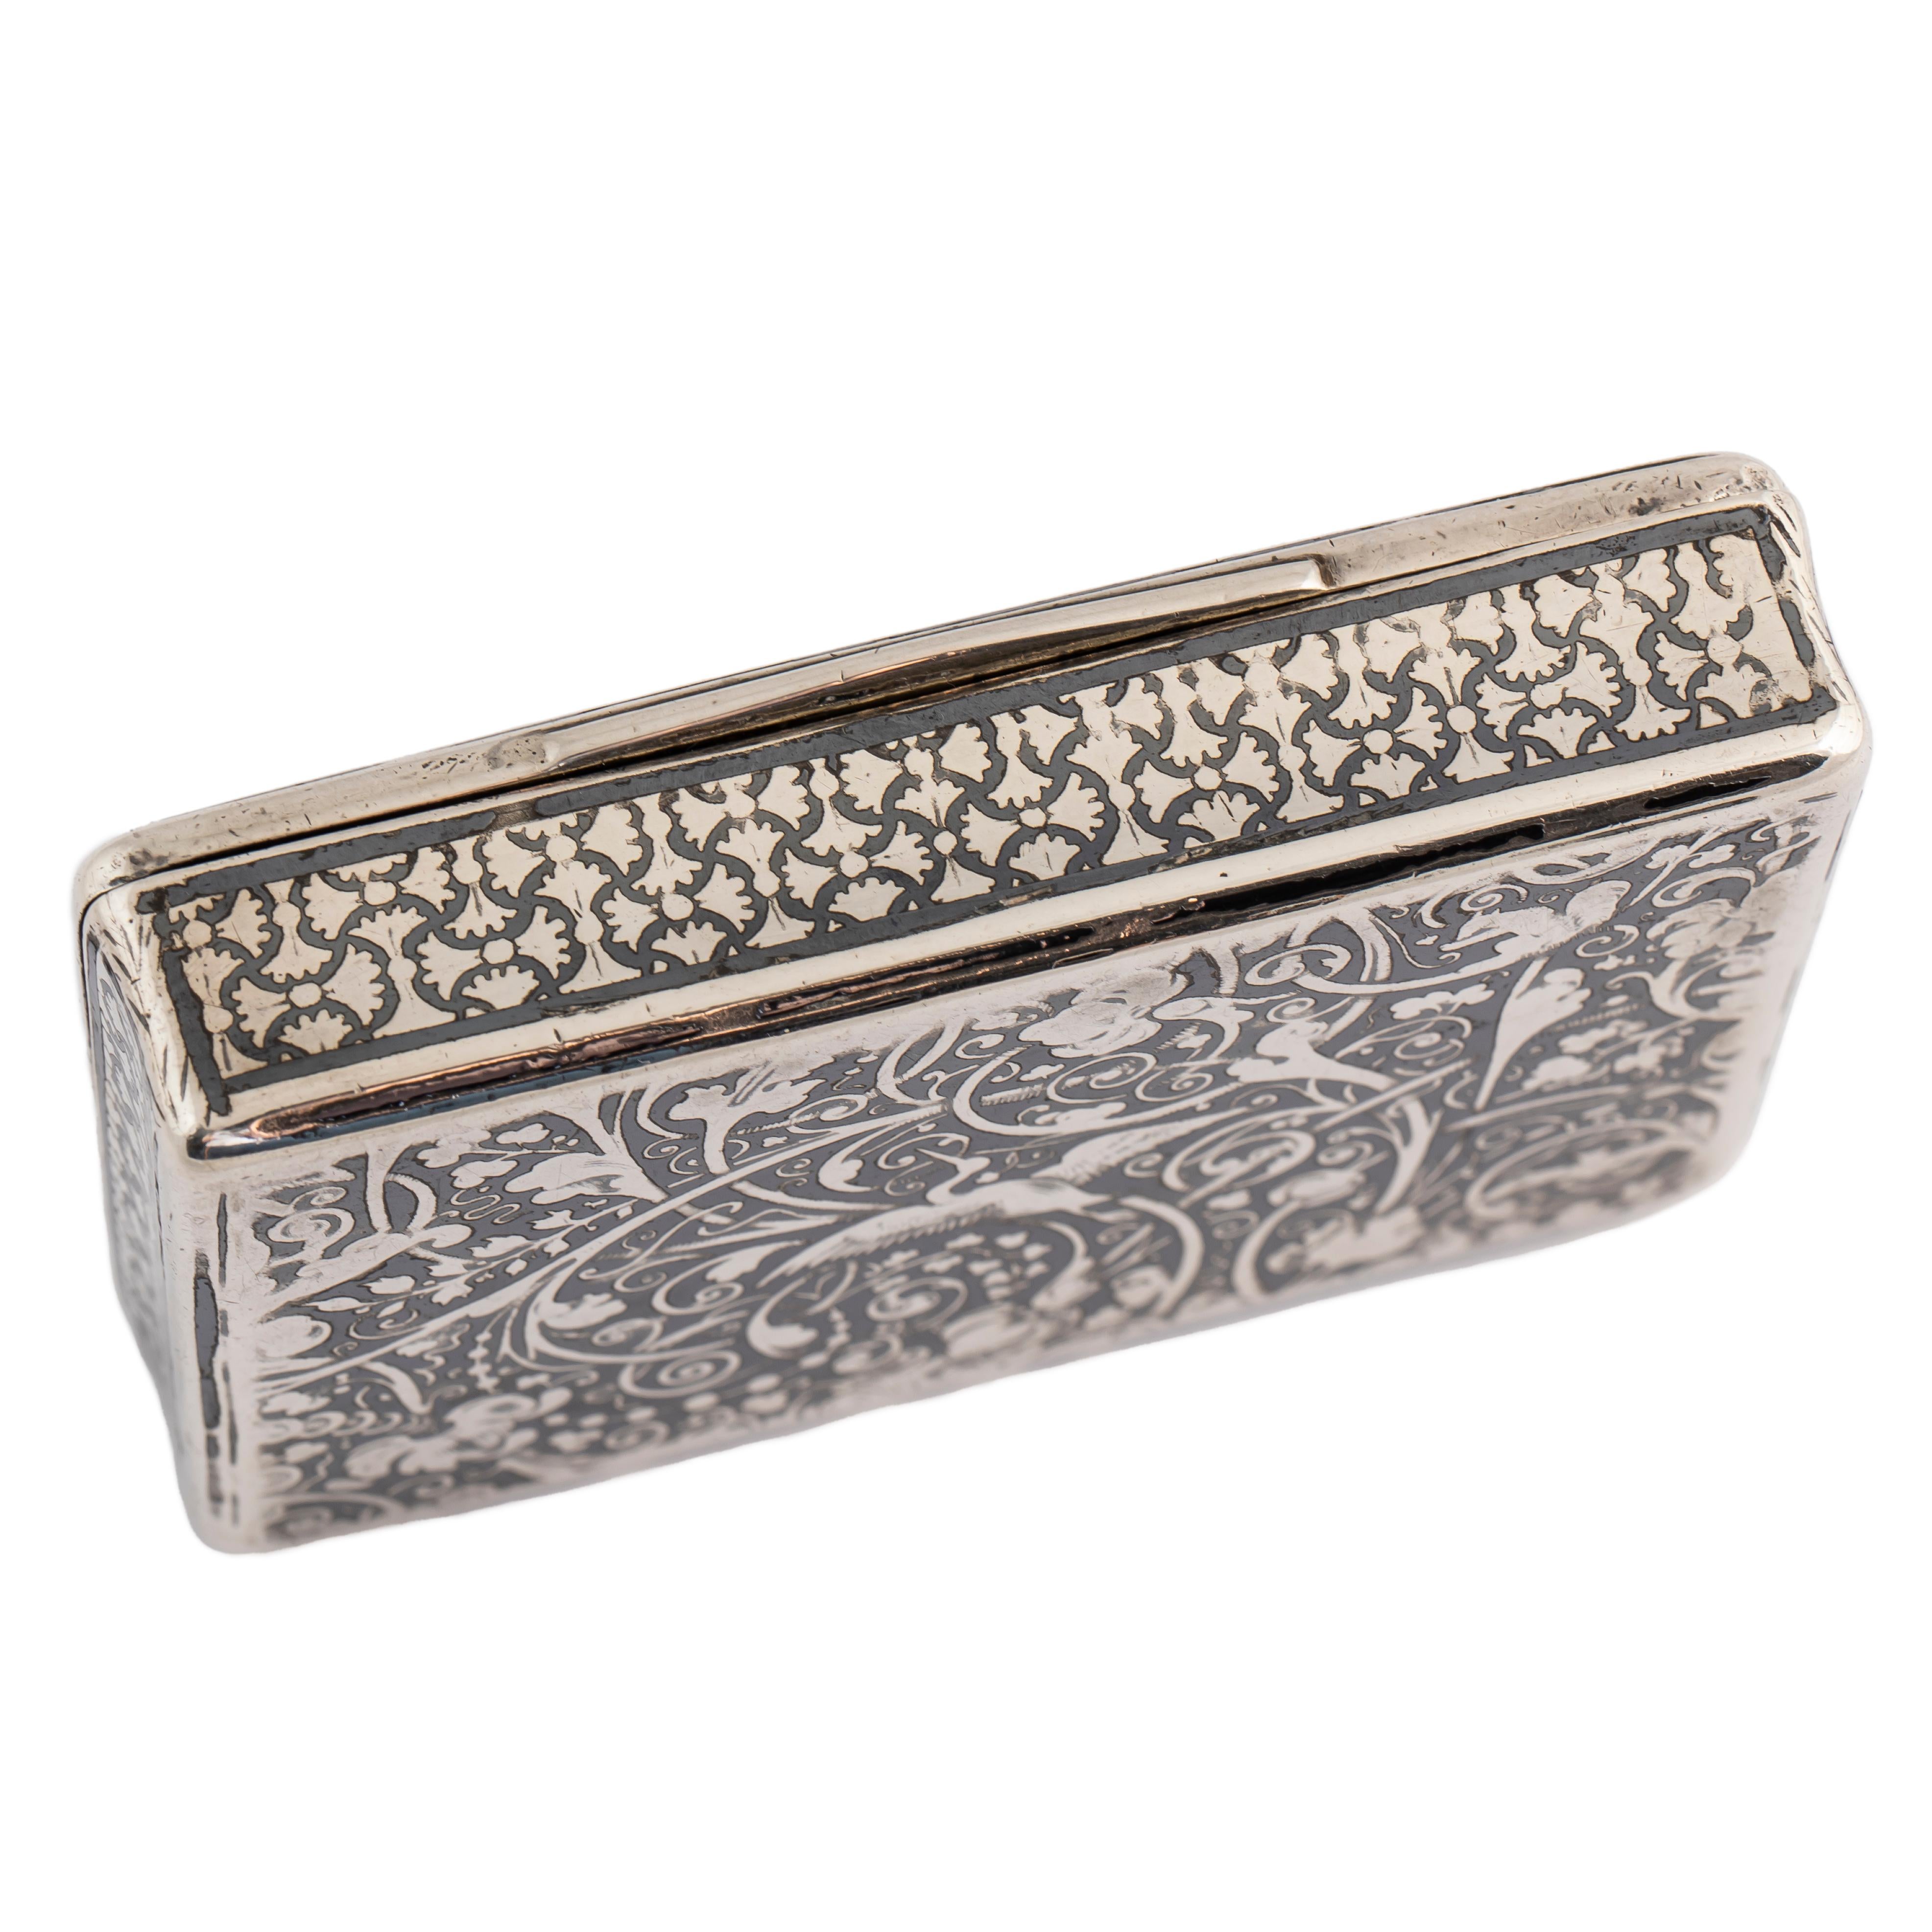 Mid-19th Century French Silver Niello Snuff Box, Hunting Scene, early 19th century For Sale